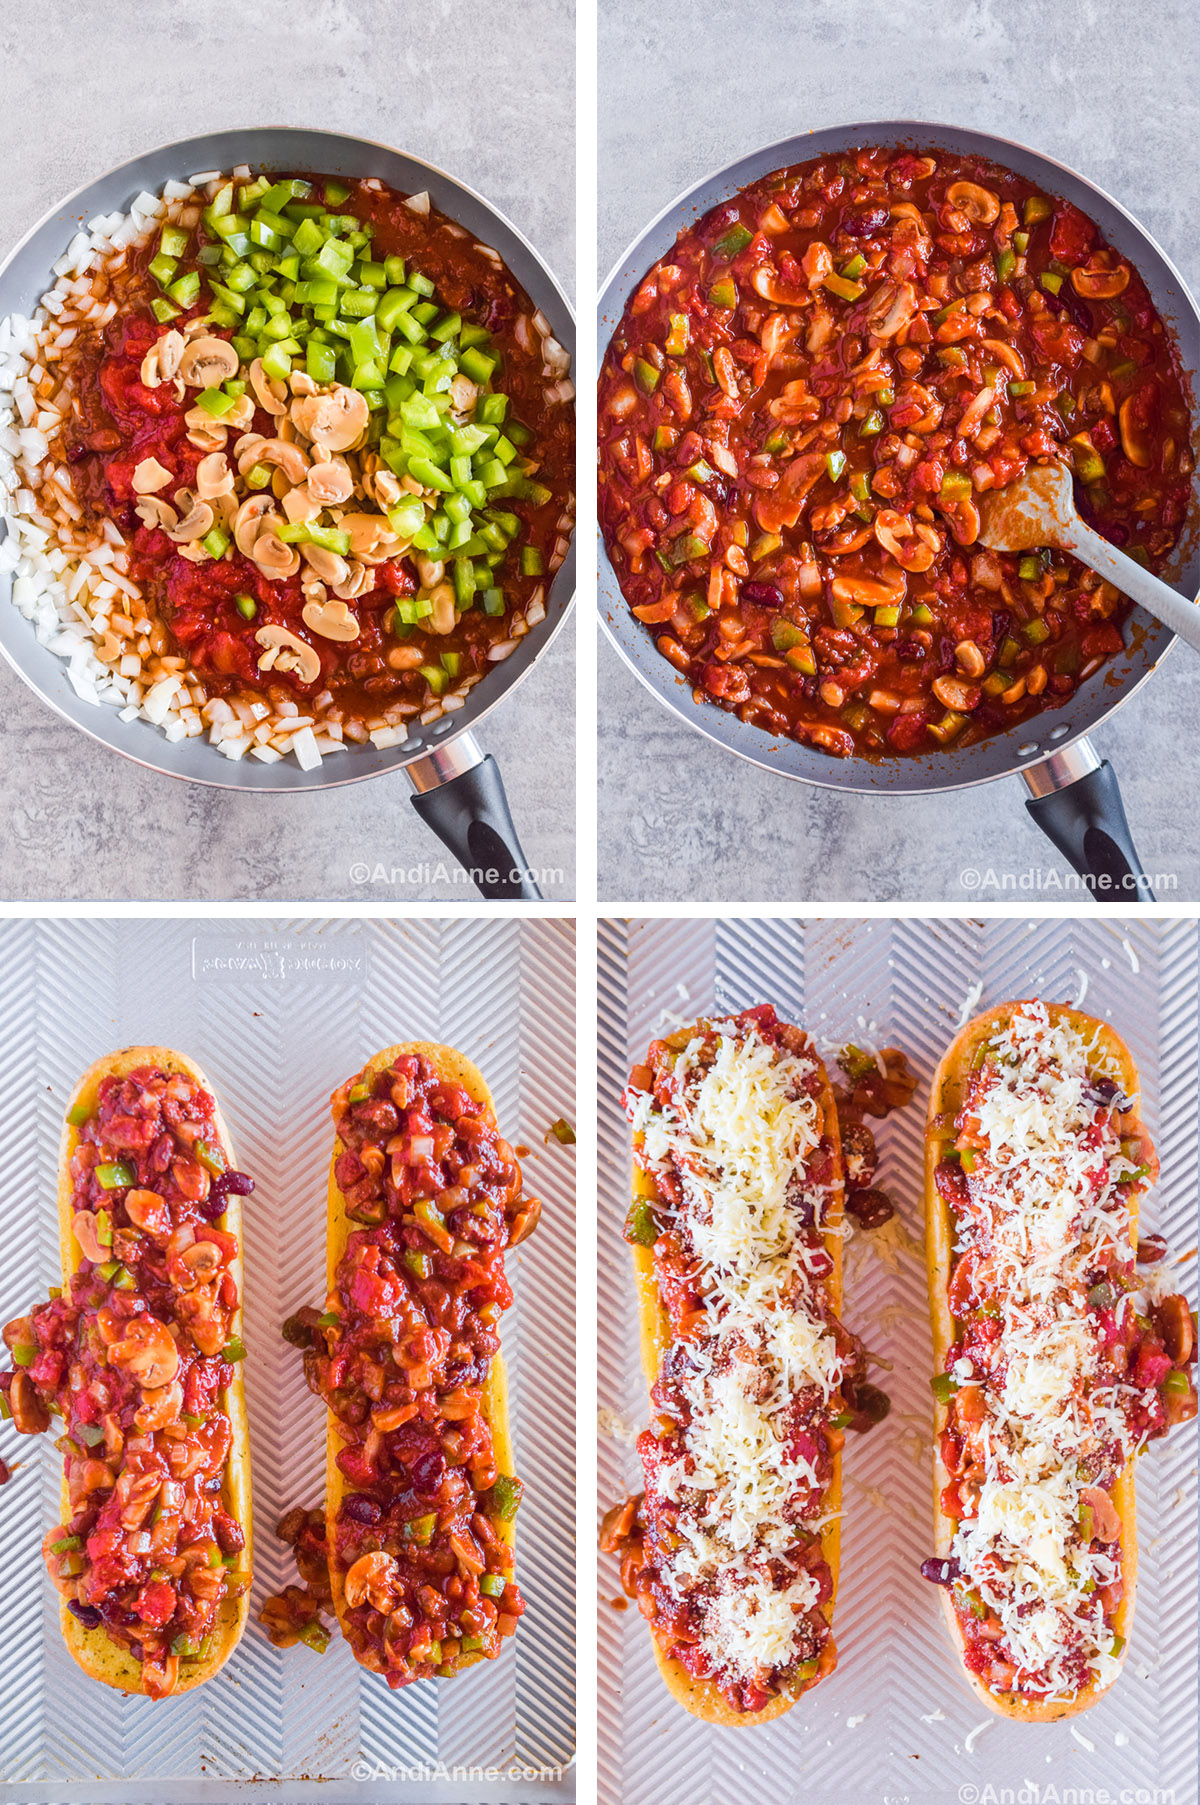 Four images showing steps to make the recipe. First is sliced mushrooms, chopped bell pepper, diced tomatoes and chopped onion in a frying pan. Second is chili mixed together. Third is sliced garlic bread topped with chili. Fourth is garlic bread topped with chili and shredded mozzarella.